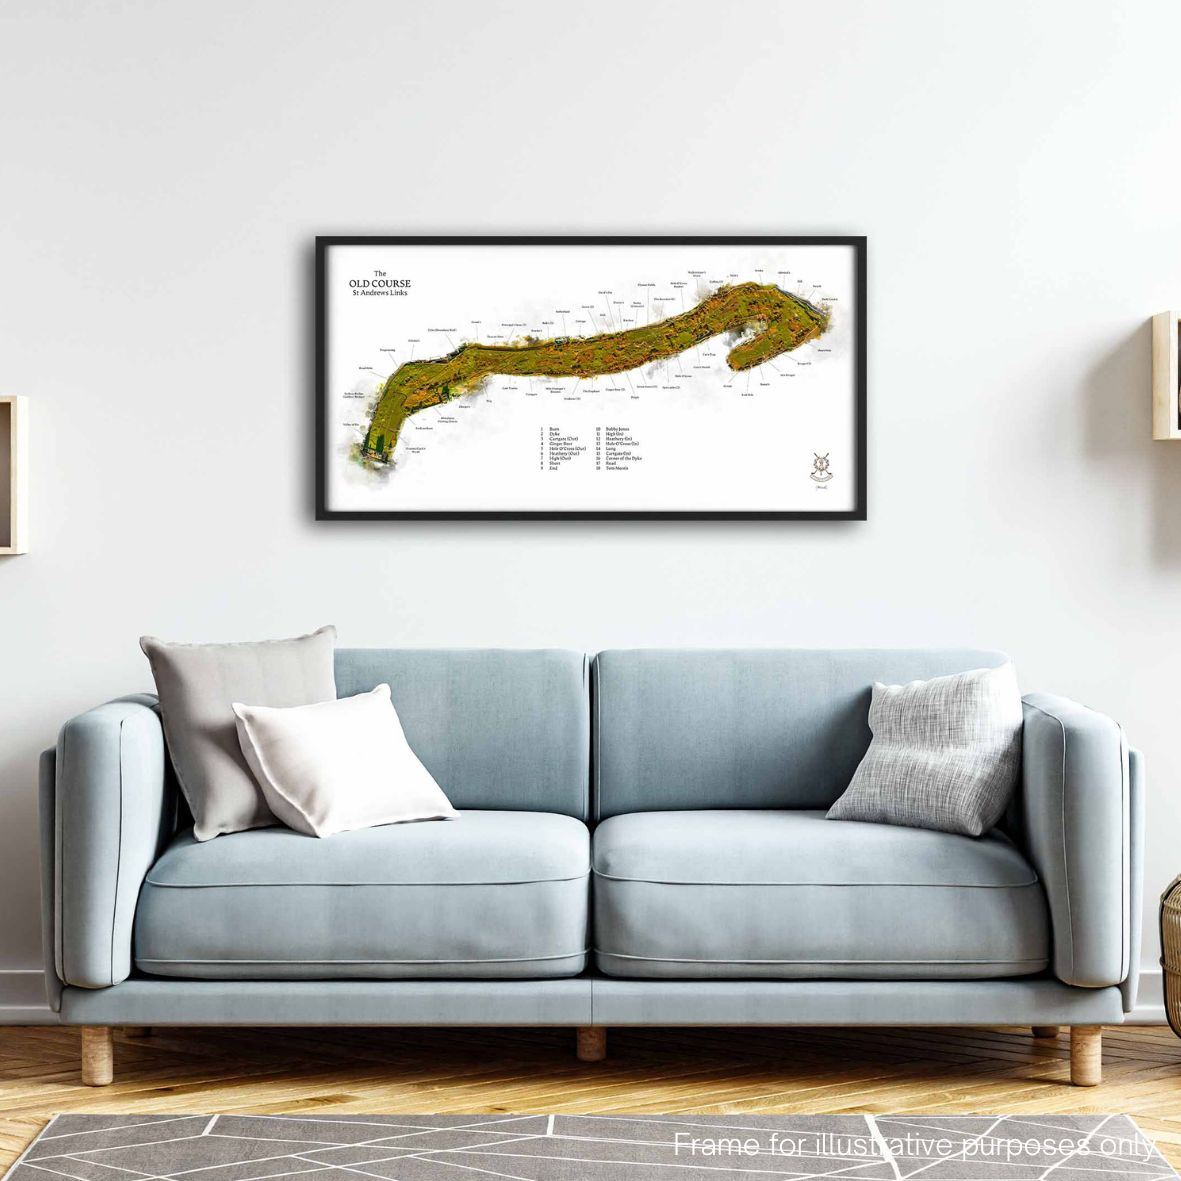 FINE ART PRINT OF THE OLD COURSE WITH FEATURES BY JOE MCDONNELL